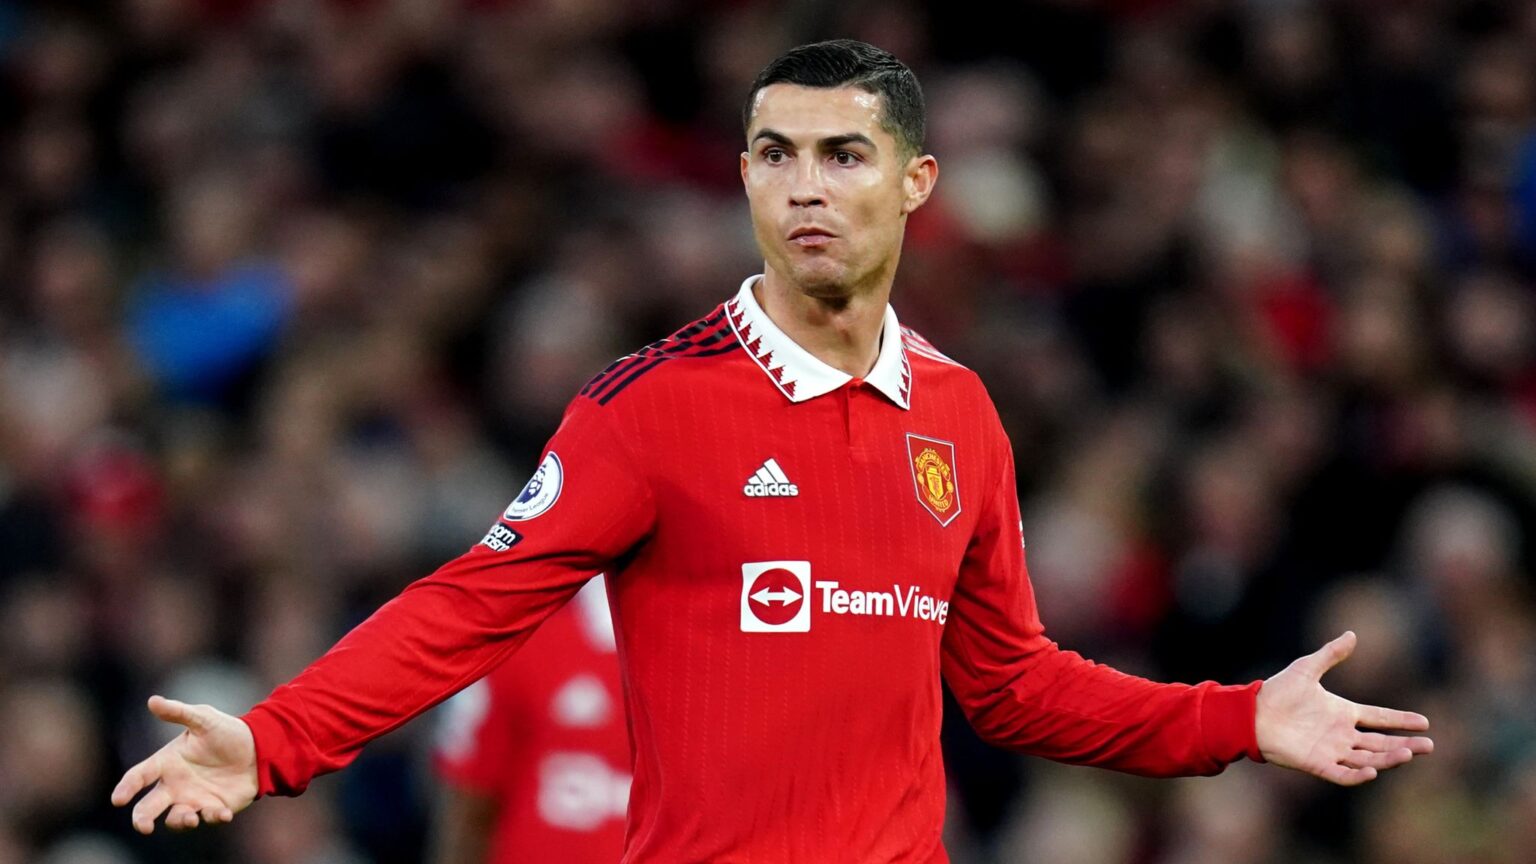 Cristiano Ronaldo says Glazers don’t care about Manchester United